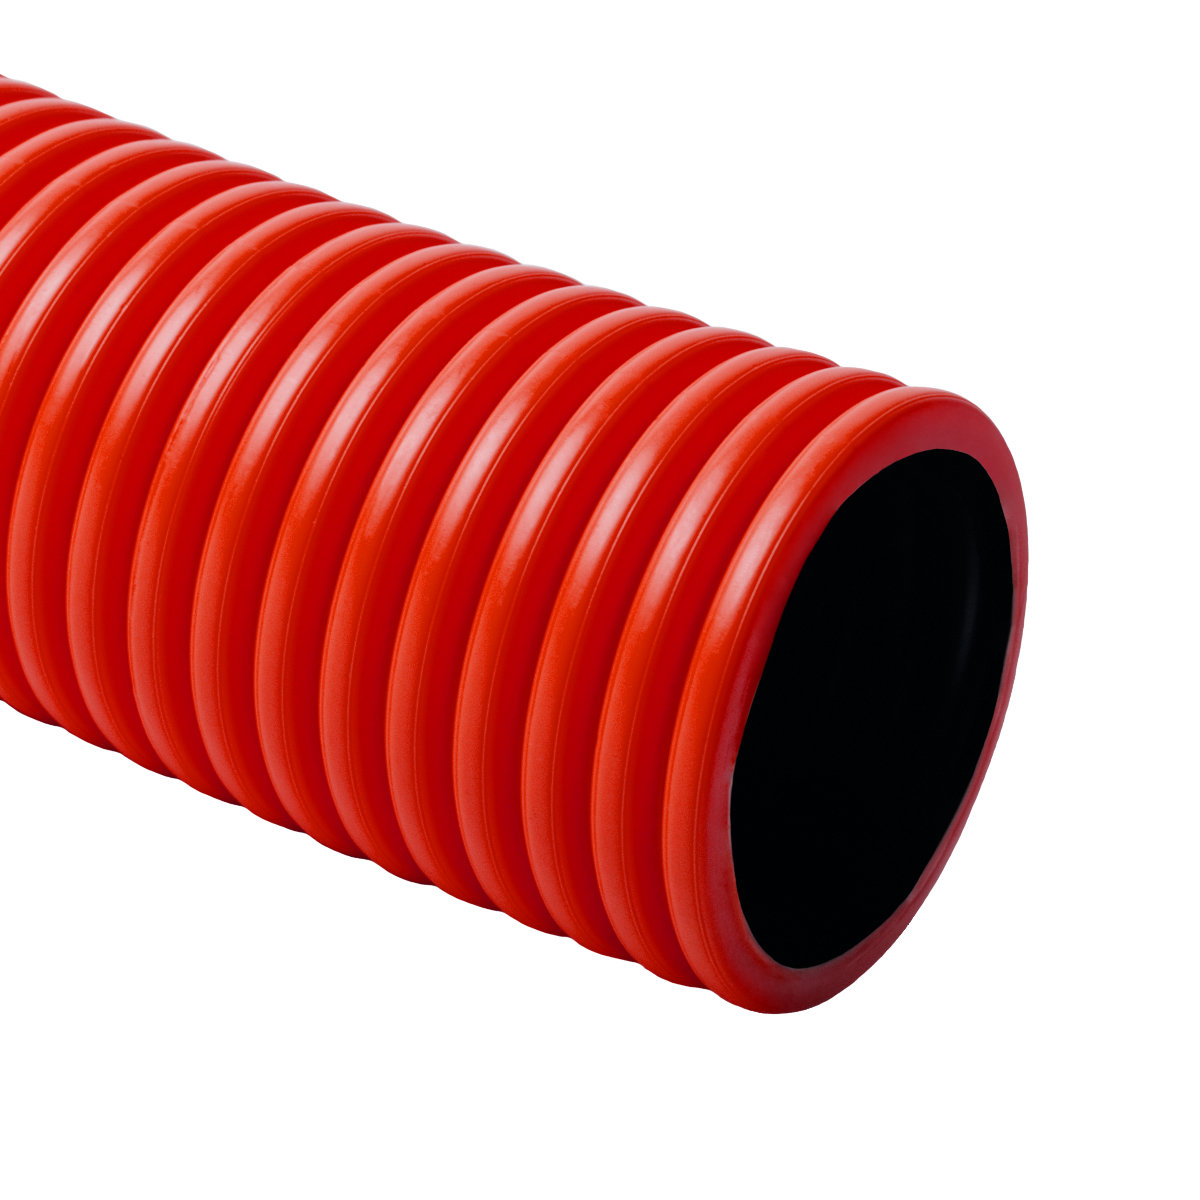 Corrugated Pipe Corrugated Hose Cable Protection Pipe Insulating Tube Marten Protection 5 10 25 50 M 